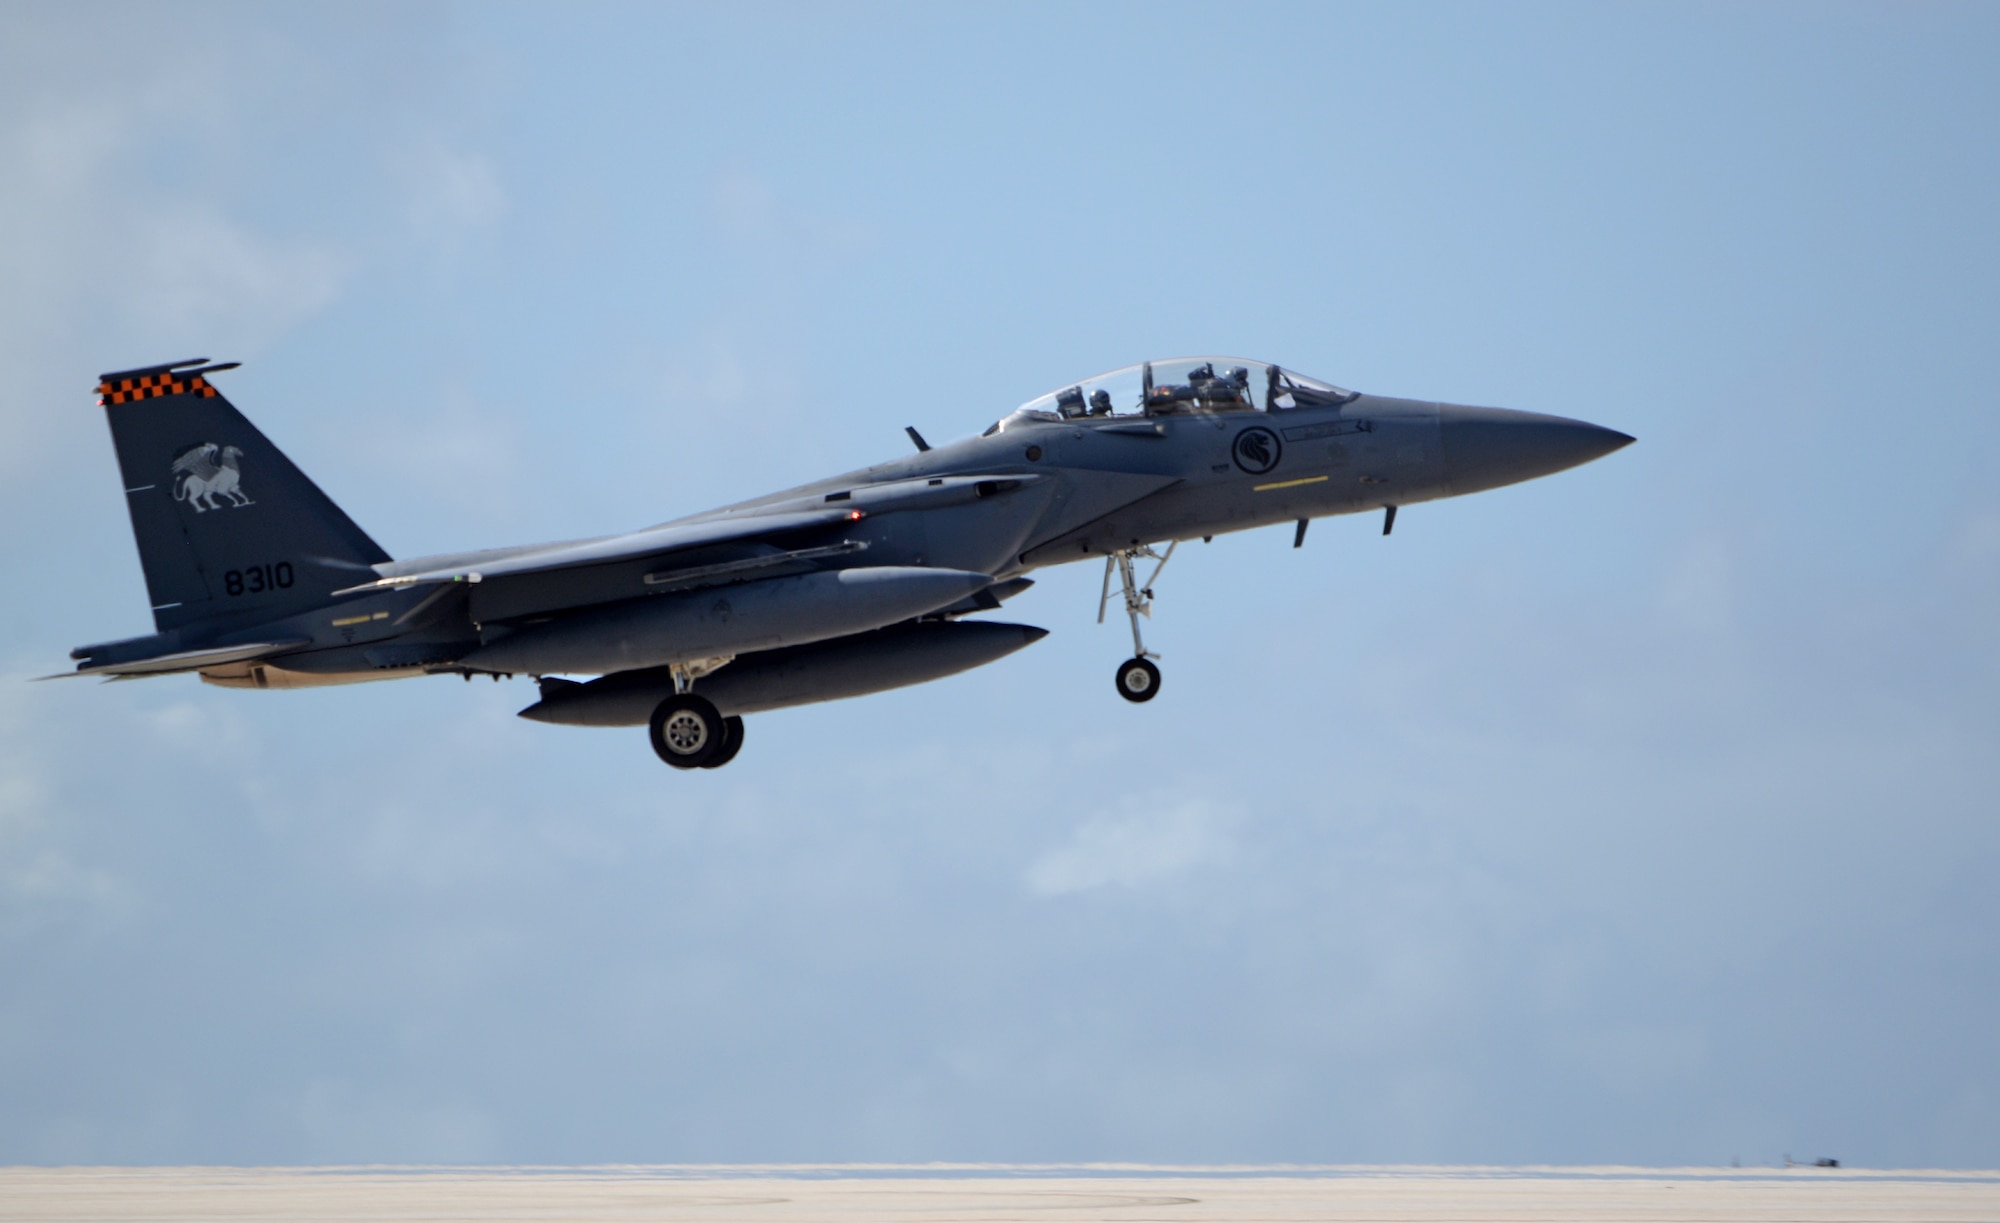 A Republic of Singapore Air Force F-15SG prepares to land April 10, 2017, at Andersen Air Force Base, Guam. The RSAF deployed to Andersen AFB to conduct bilateral training for aircrew and maintenance personnel to sharpen their skills and strengthen ties with partners in the Pacific. (U.S. Air Force Airman/1st Class Gerald R. Willis)